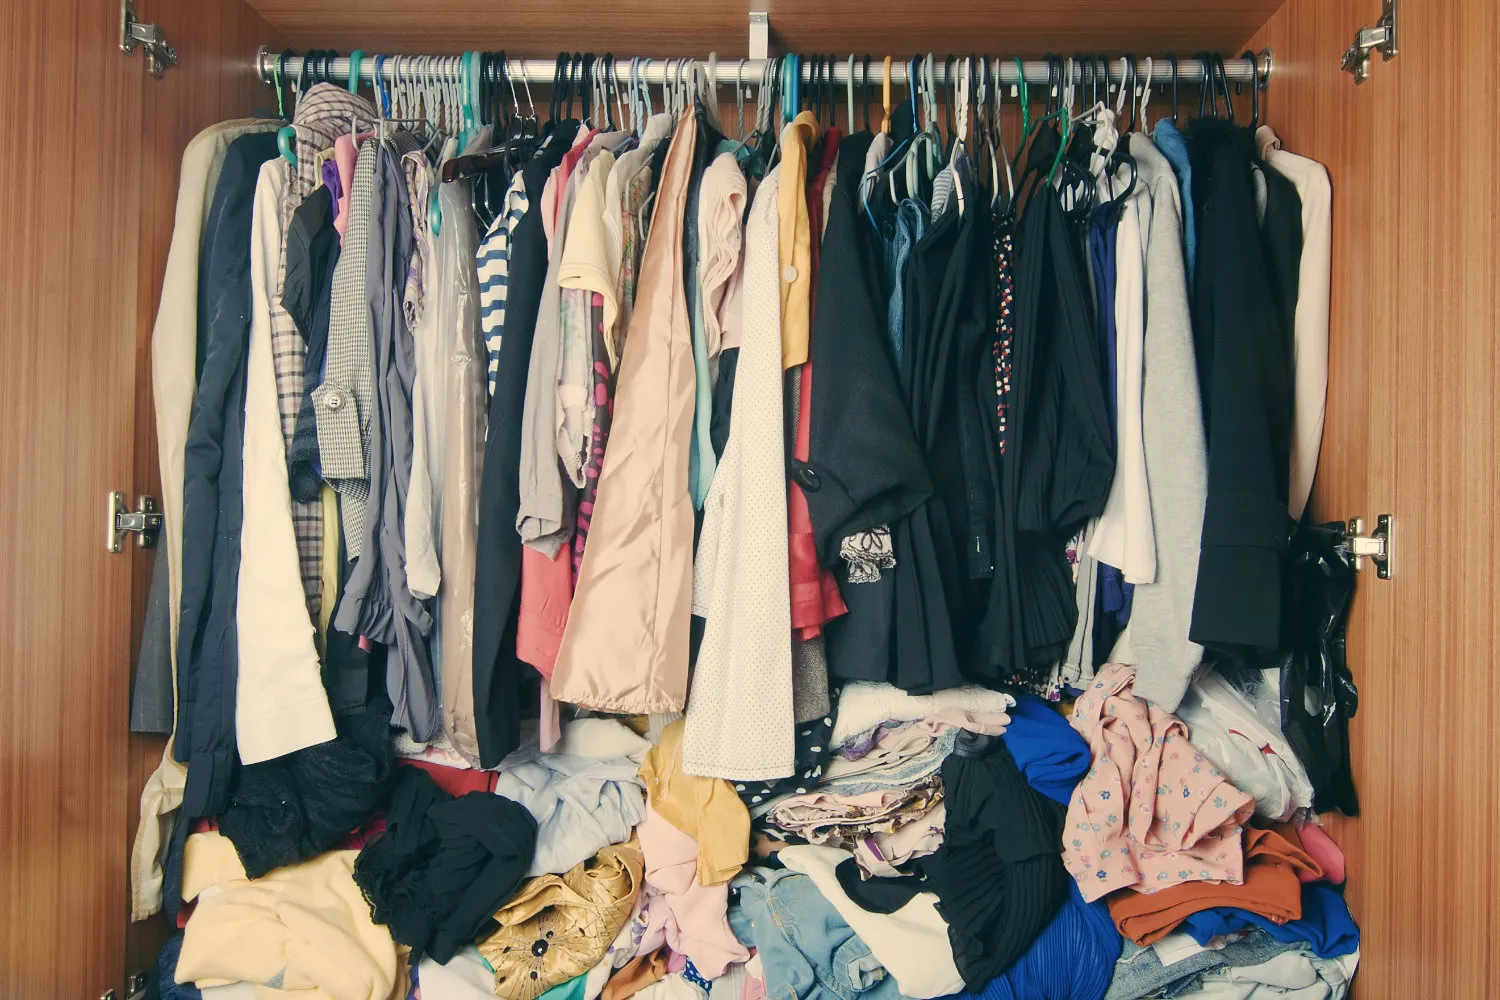 How To Get Rid Of Smells in Your Closet